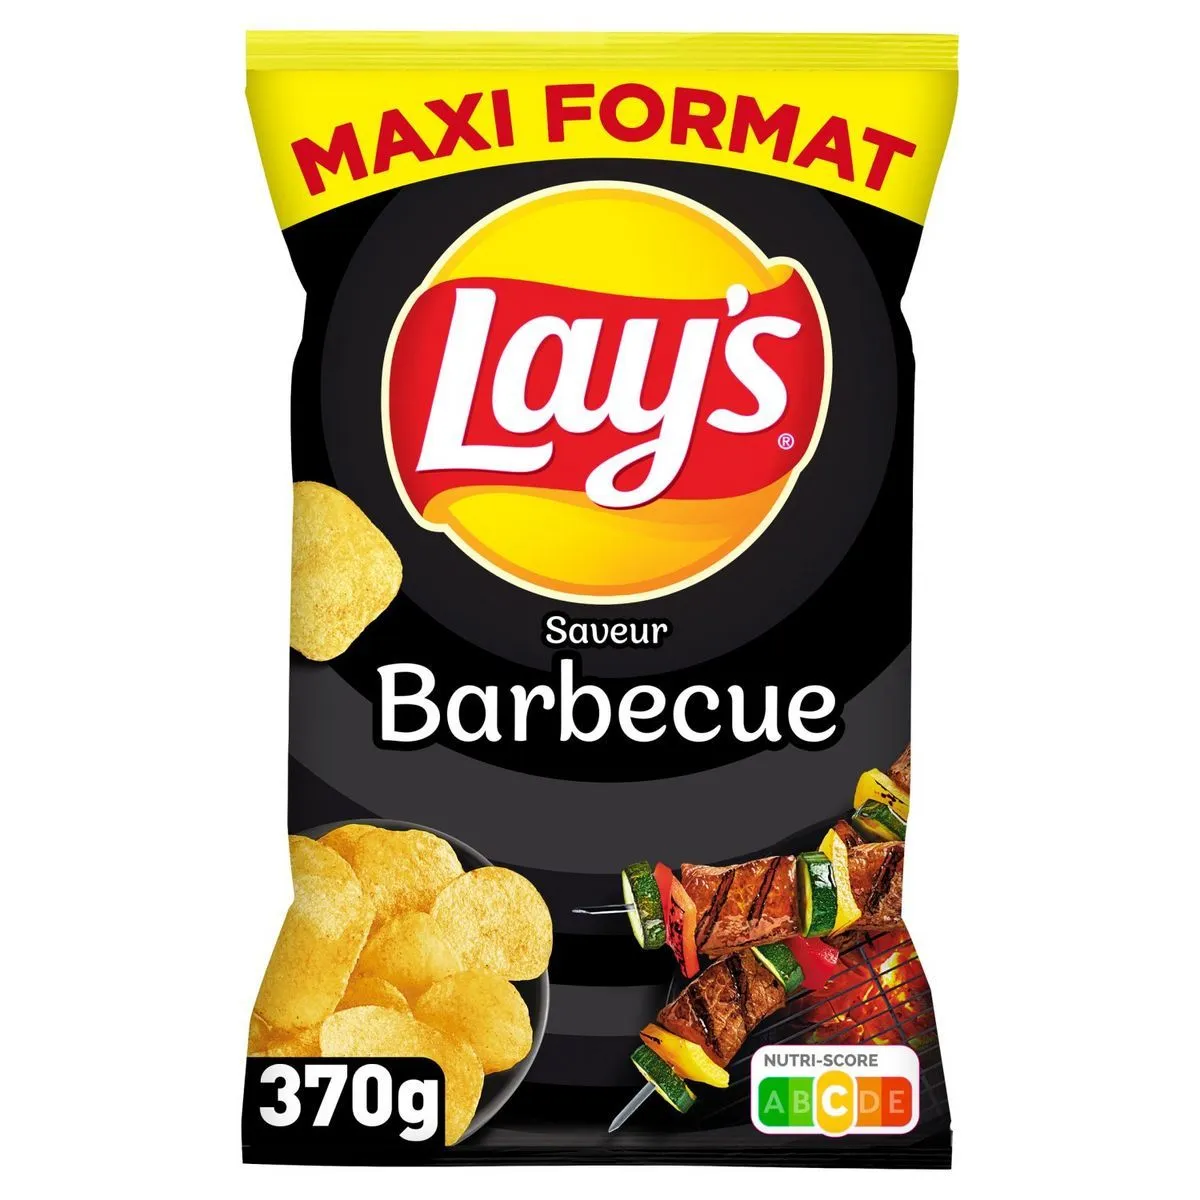 chips saveur barbecue maxi format lay's